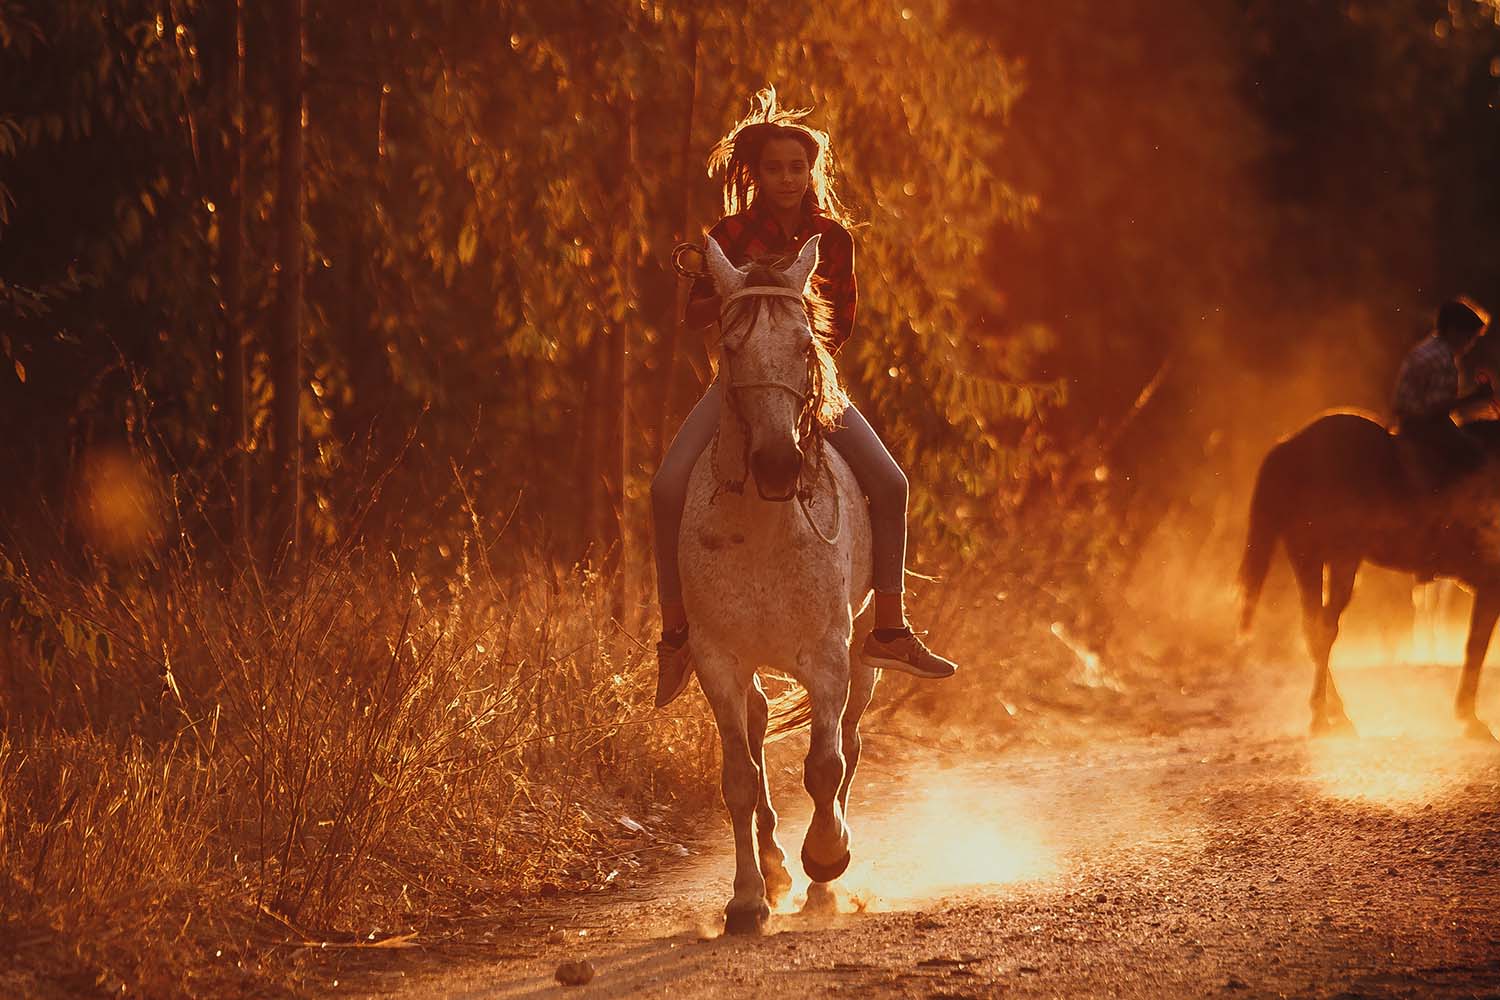 Learn More About Horse Riding Clothing and Equipment